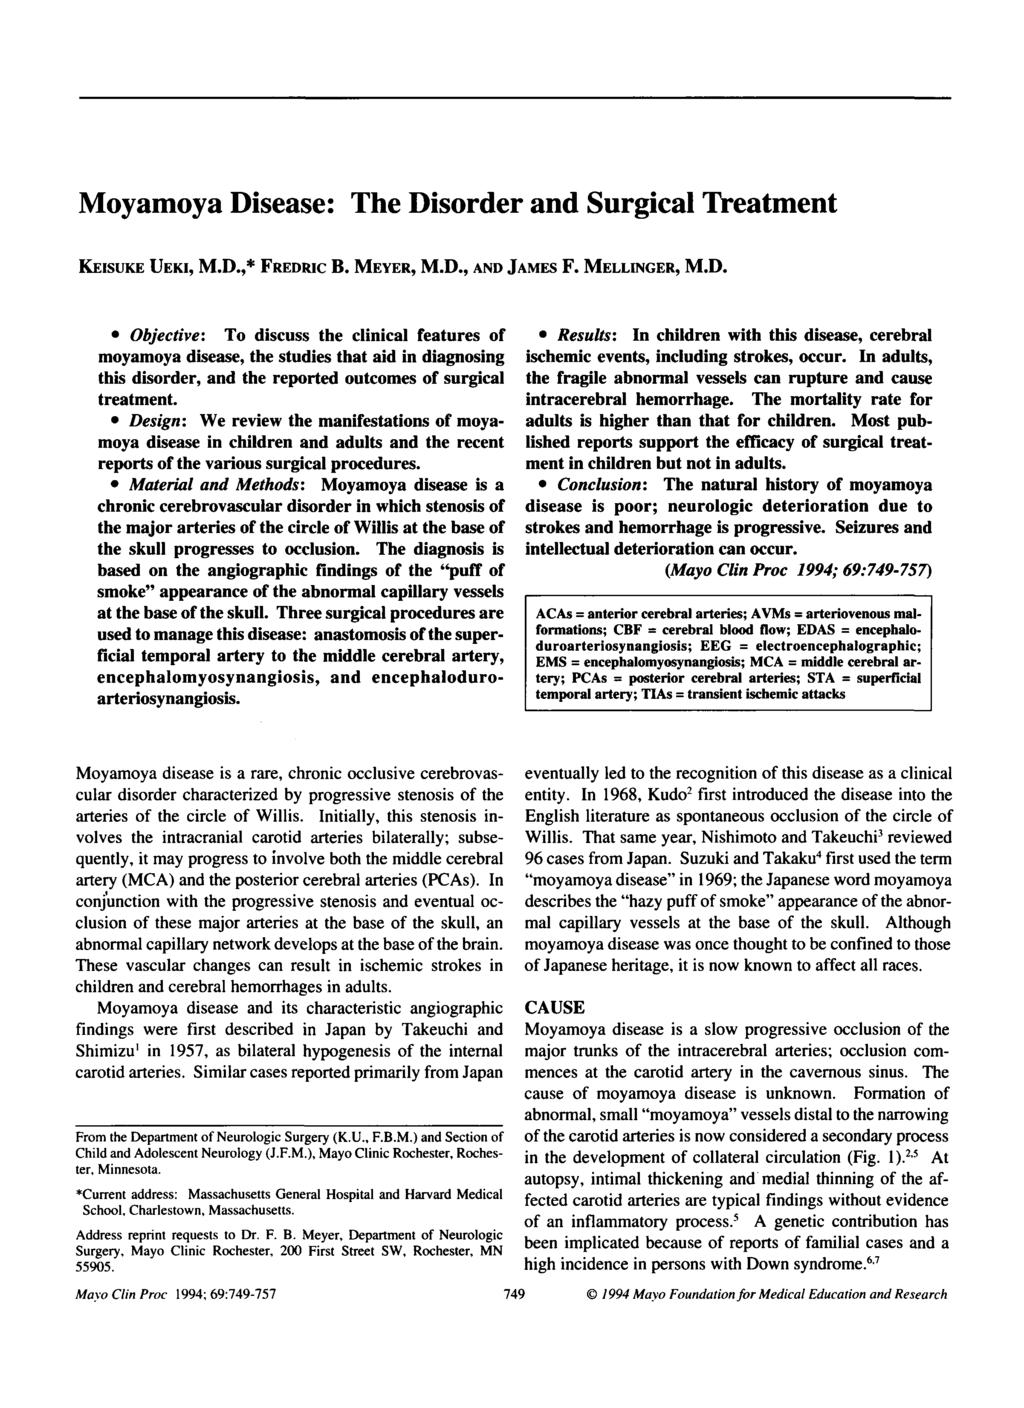 Subject Review Moyamoya Disease: The Disorder and Surgical Treatment KEISUKE UEKI, M.D.,* FREDRIC B. MEYER, M.D., AND JAMES F. MELLINGER, M.D. Objective: To discuss the clinical features of moyamoya disease, the studies that aid in diagnosing this disorder, and the reported outcomes of surgical treatment.